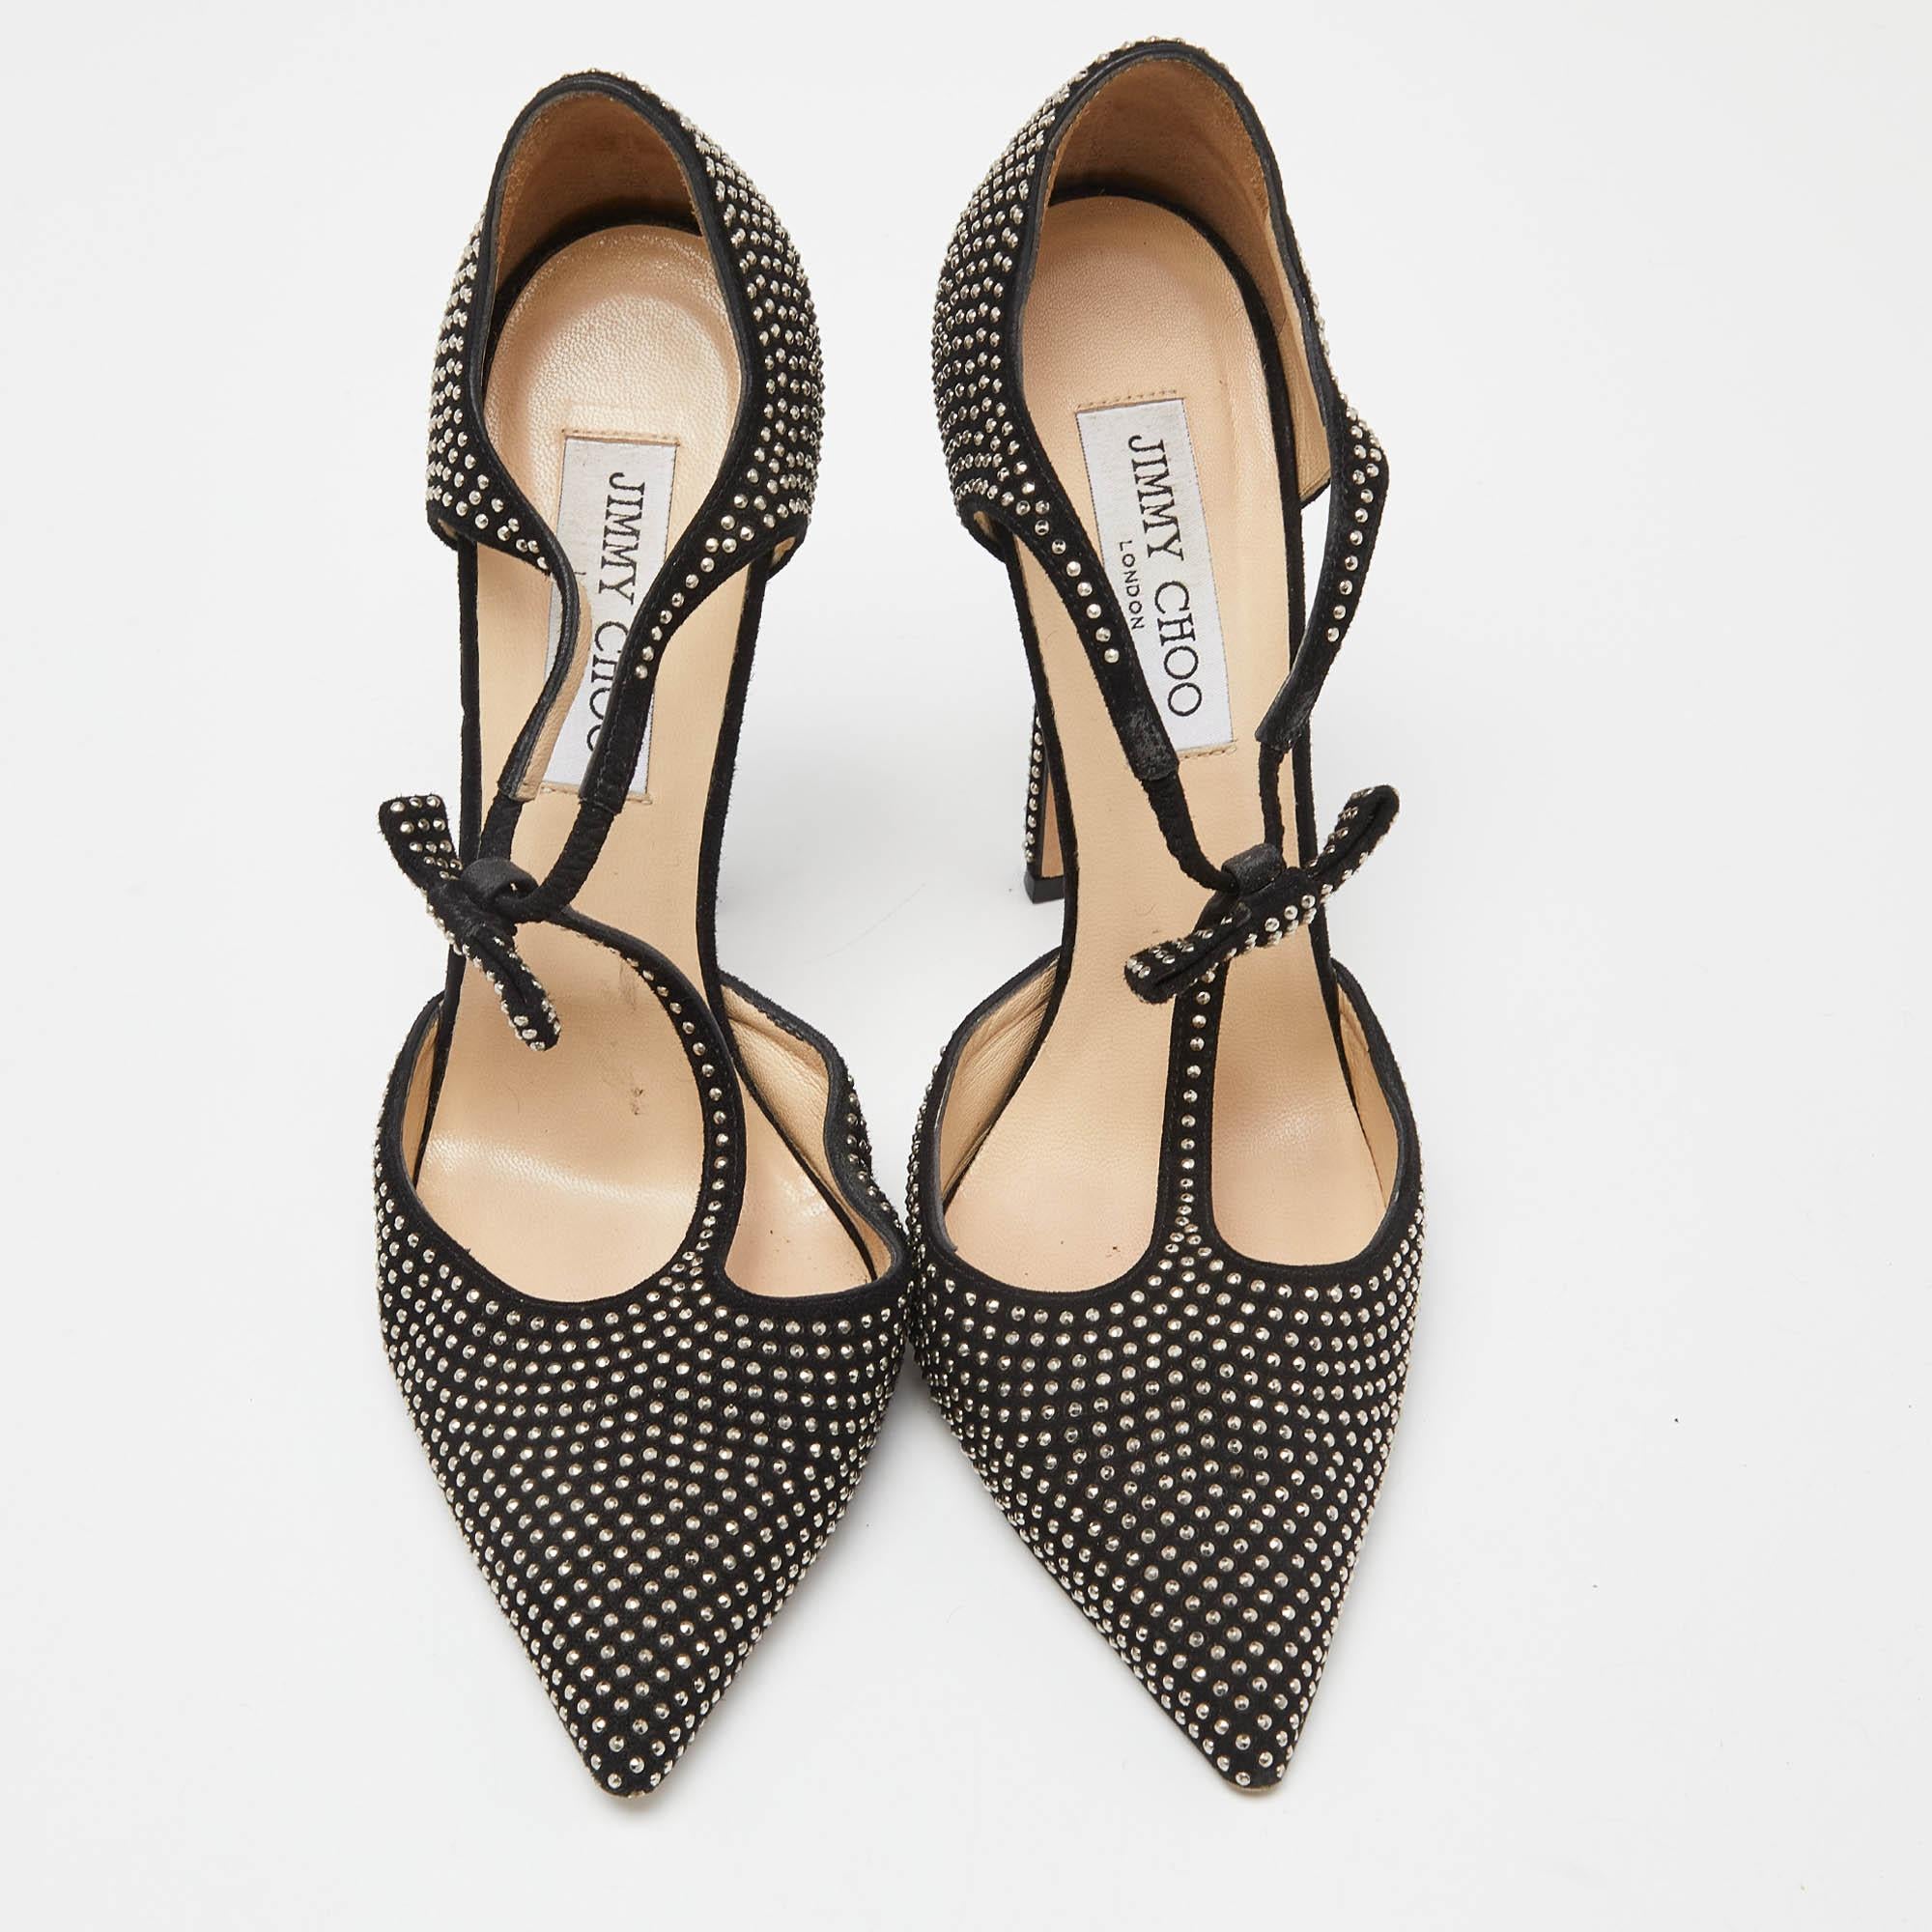 Jimmy Choo Black Studded Suede Talan T Strap Pointed Toe Pumps Size 39 In Fair Condition For Sale In Dubai, Al Qouz 2